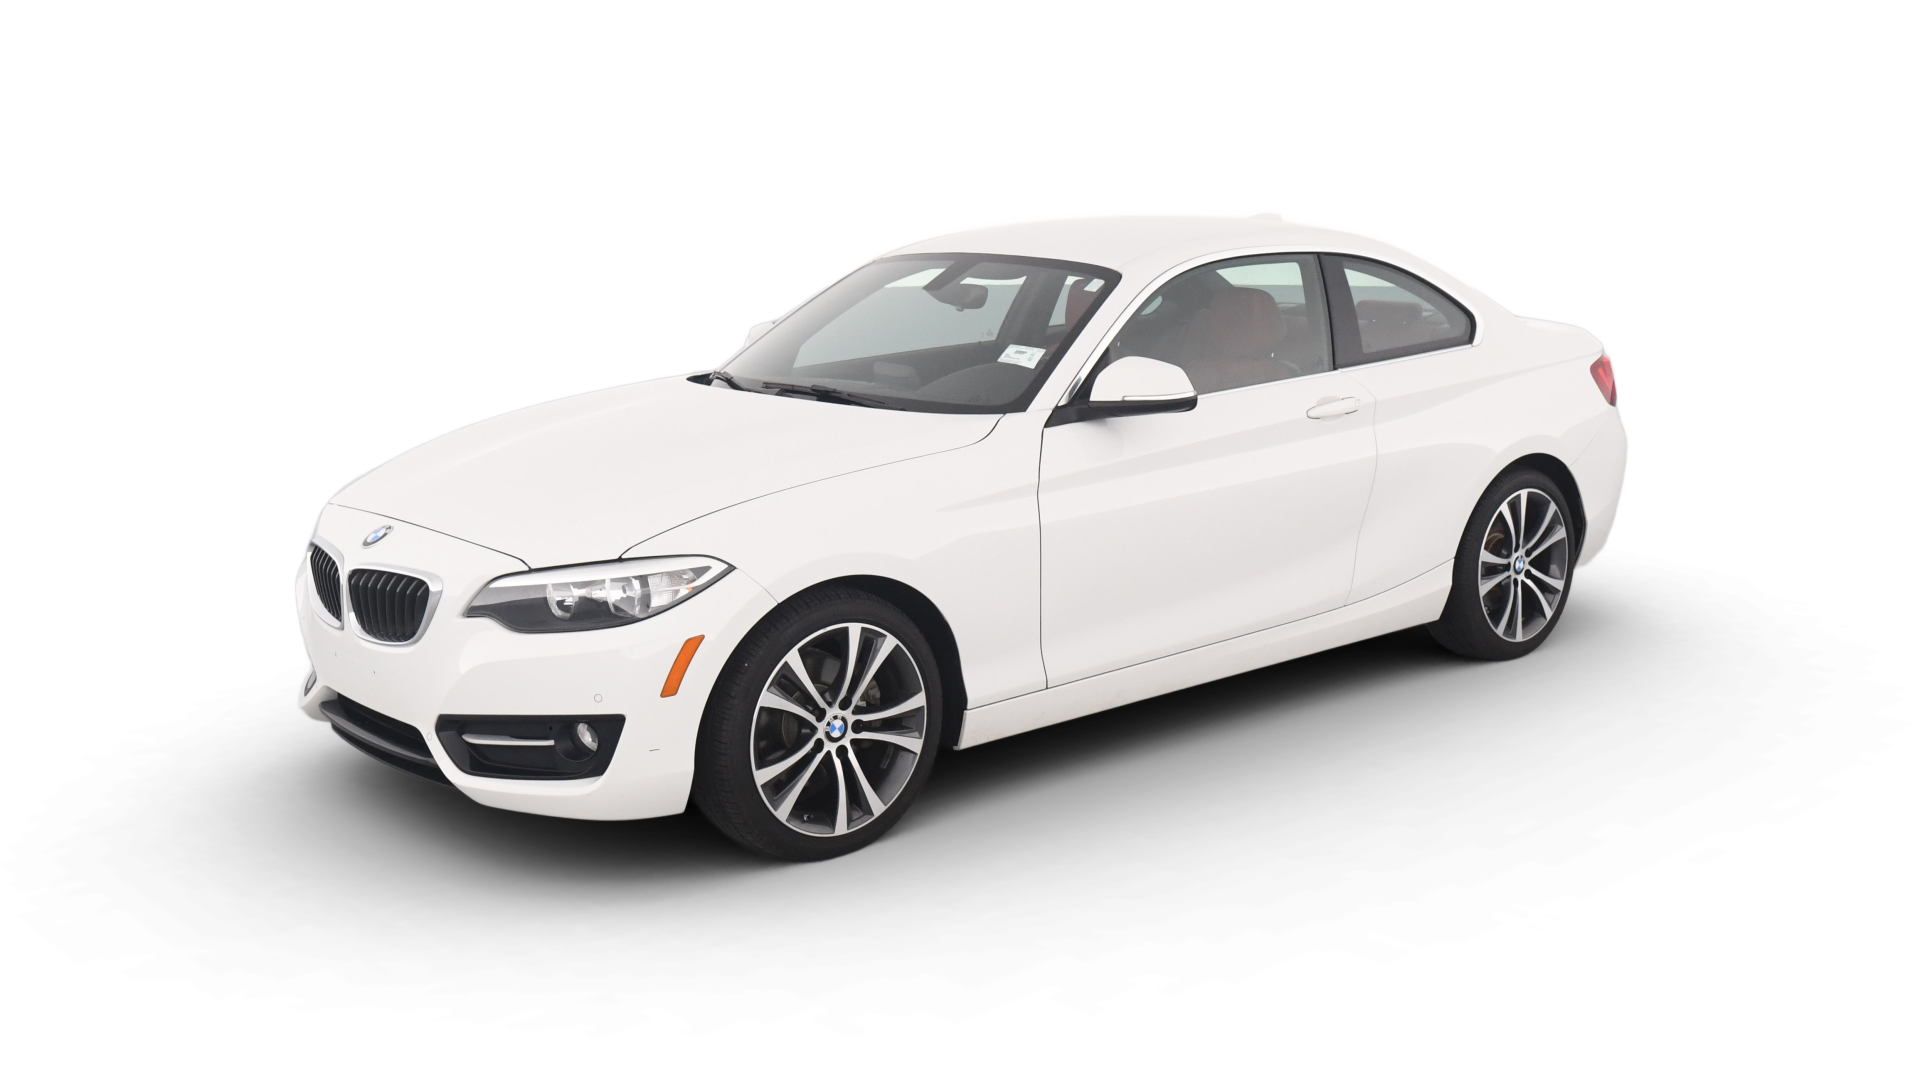 Used BMW 2 Series 228i For Sale Online | Carvana